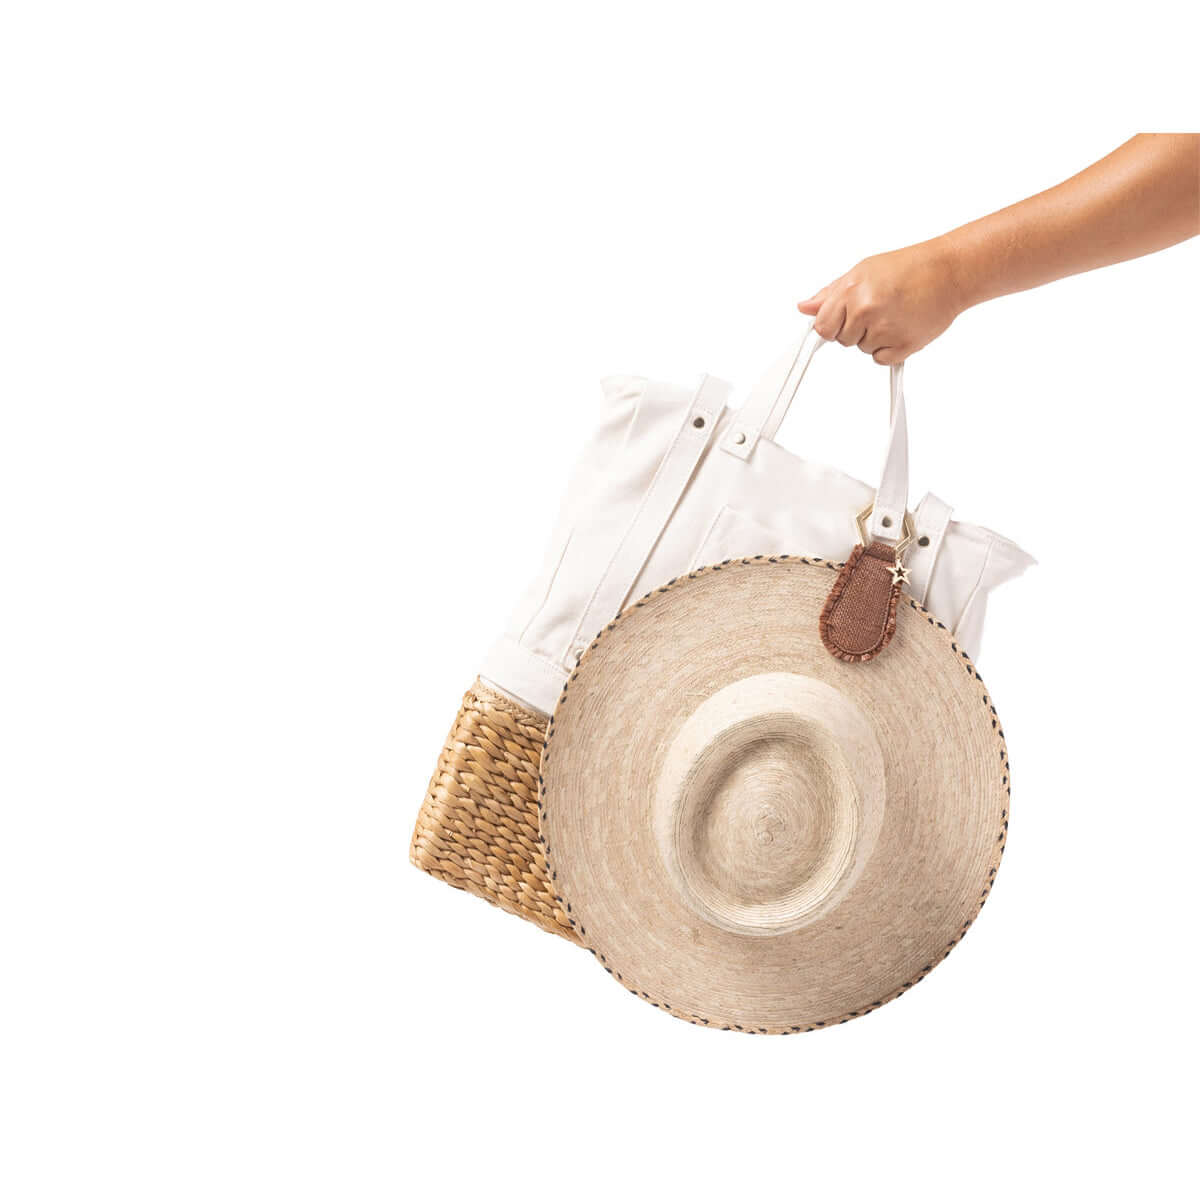  TOPTOTE by Lindsay Albanese hat clip collaboration with LSpace swimwear in brown with raffia fray trim